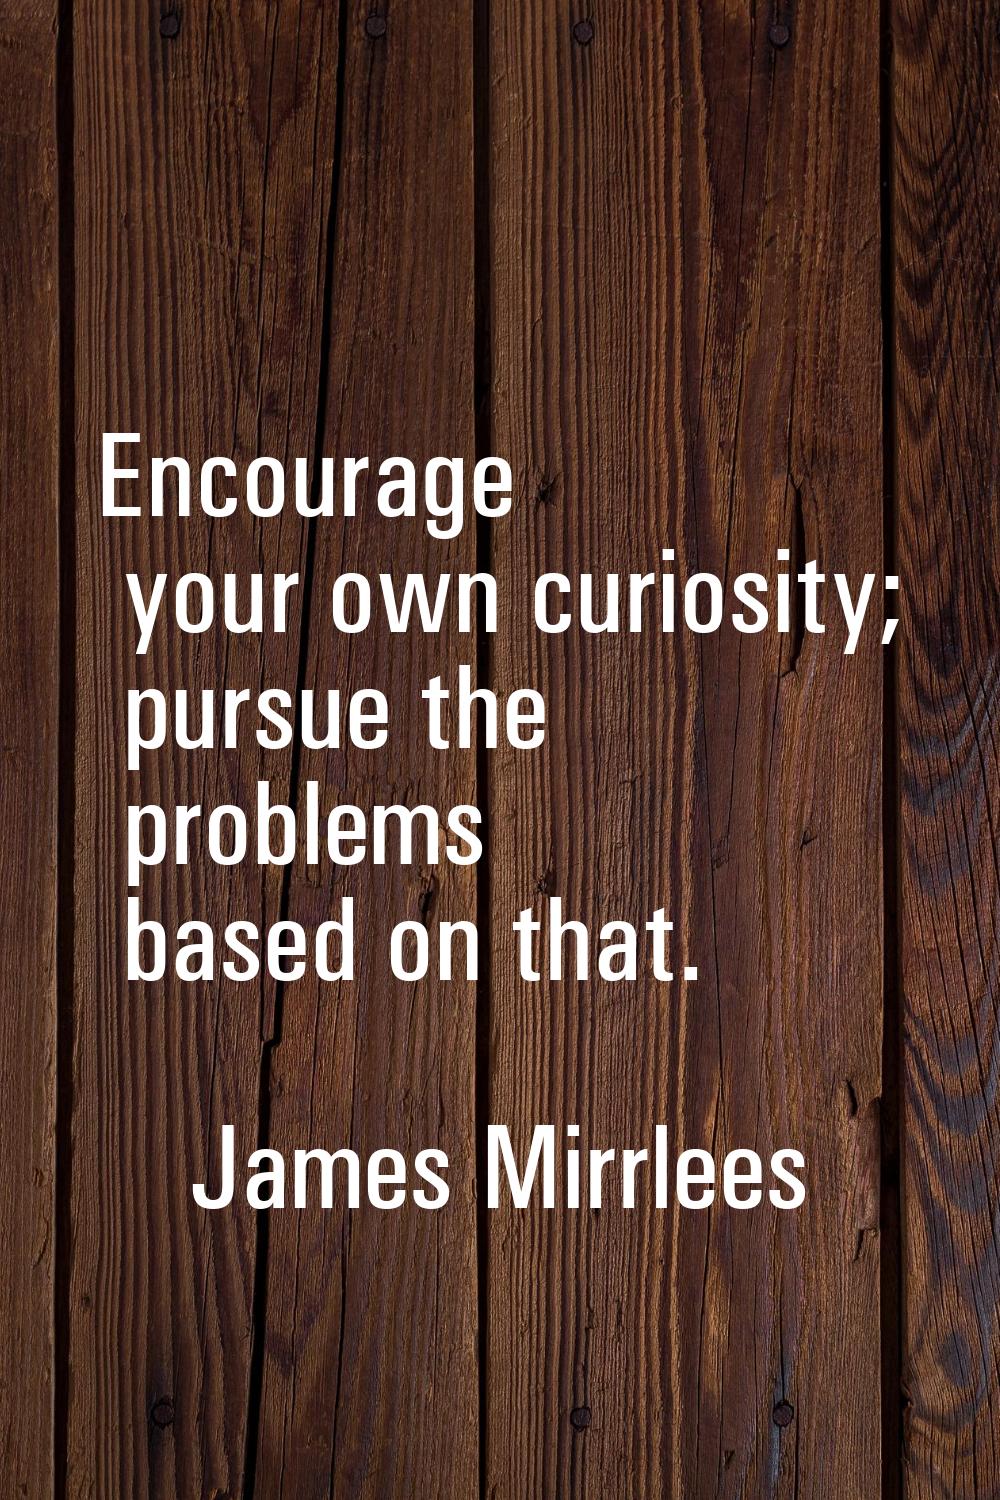 Encourage your own curiosity; pursue the problems based on that.